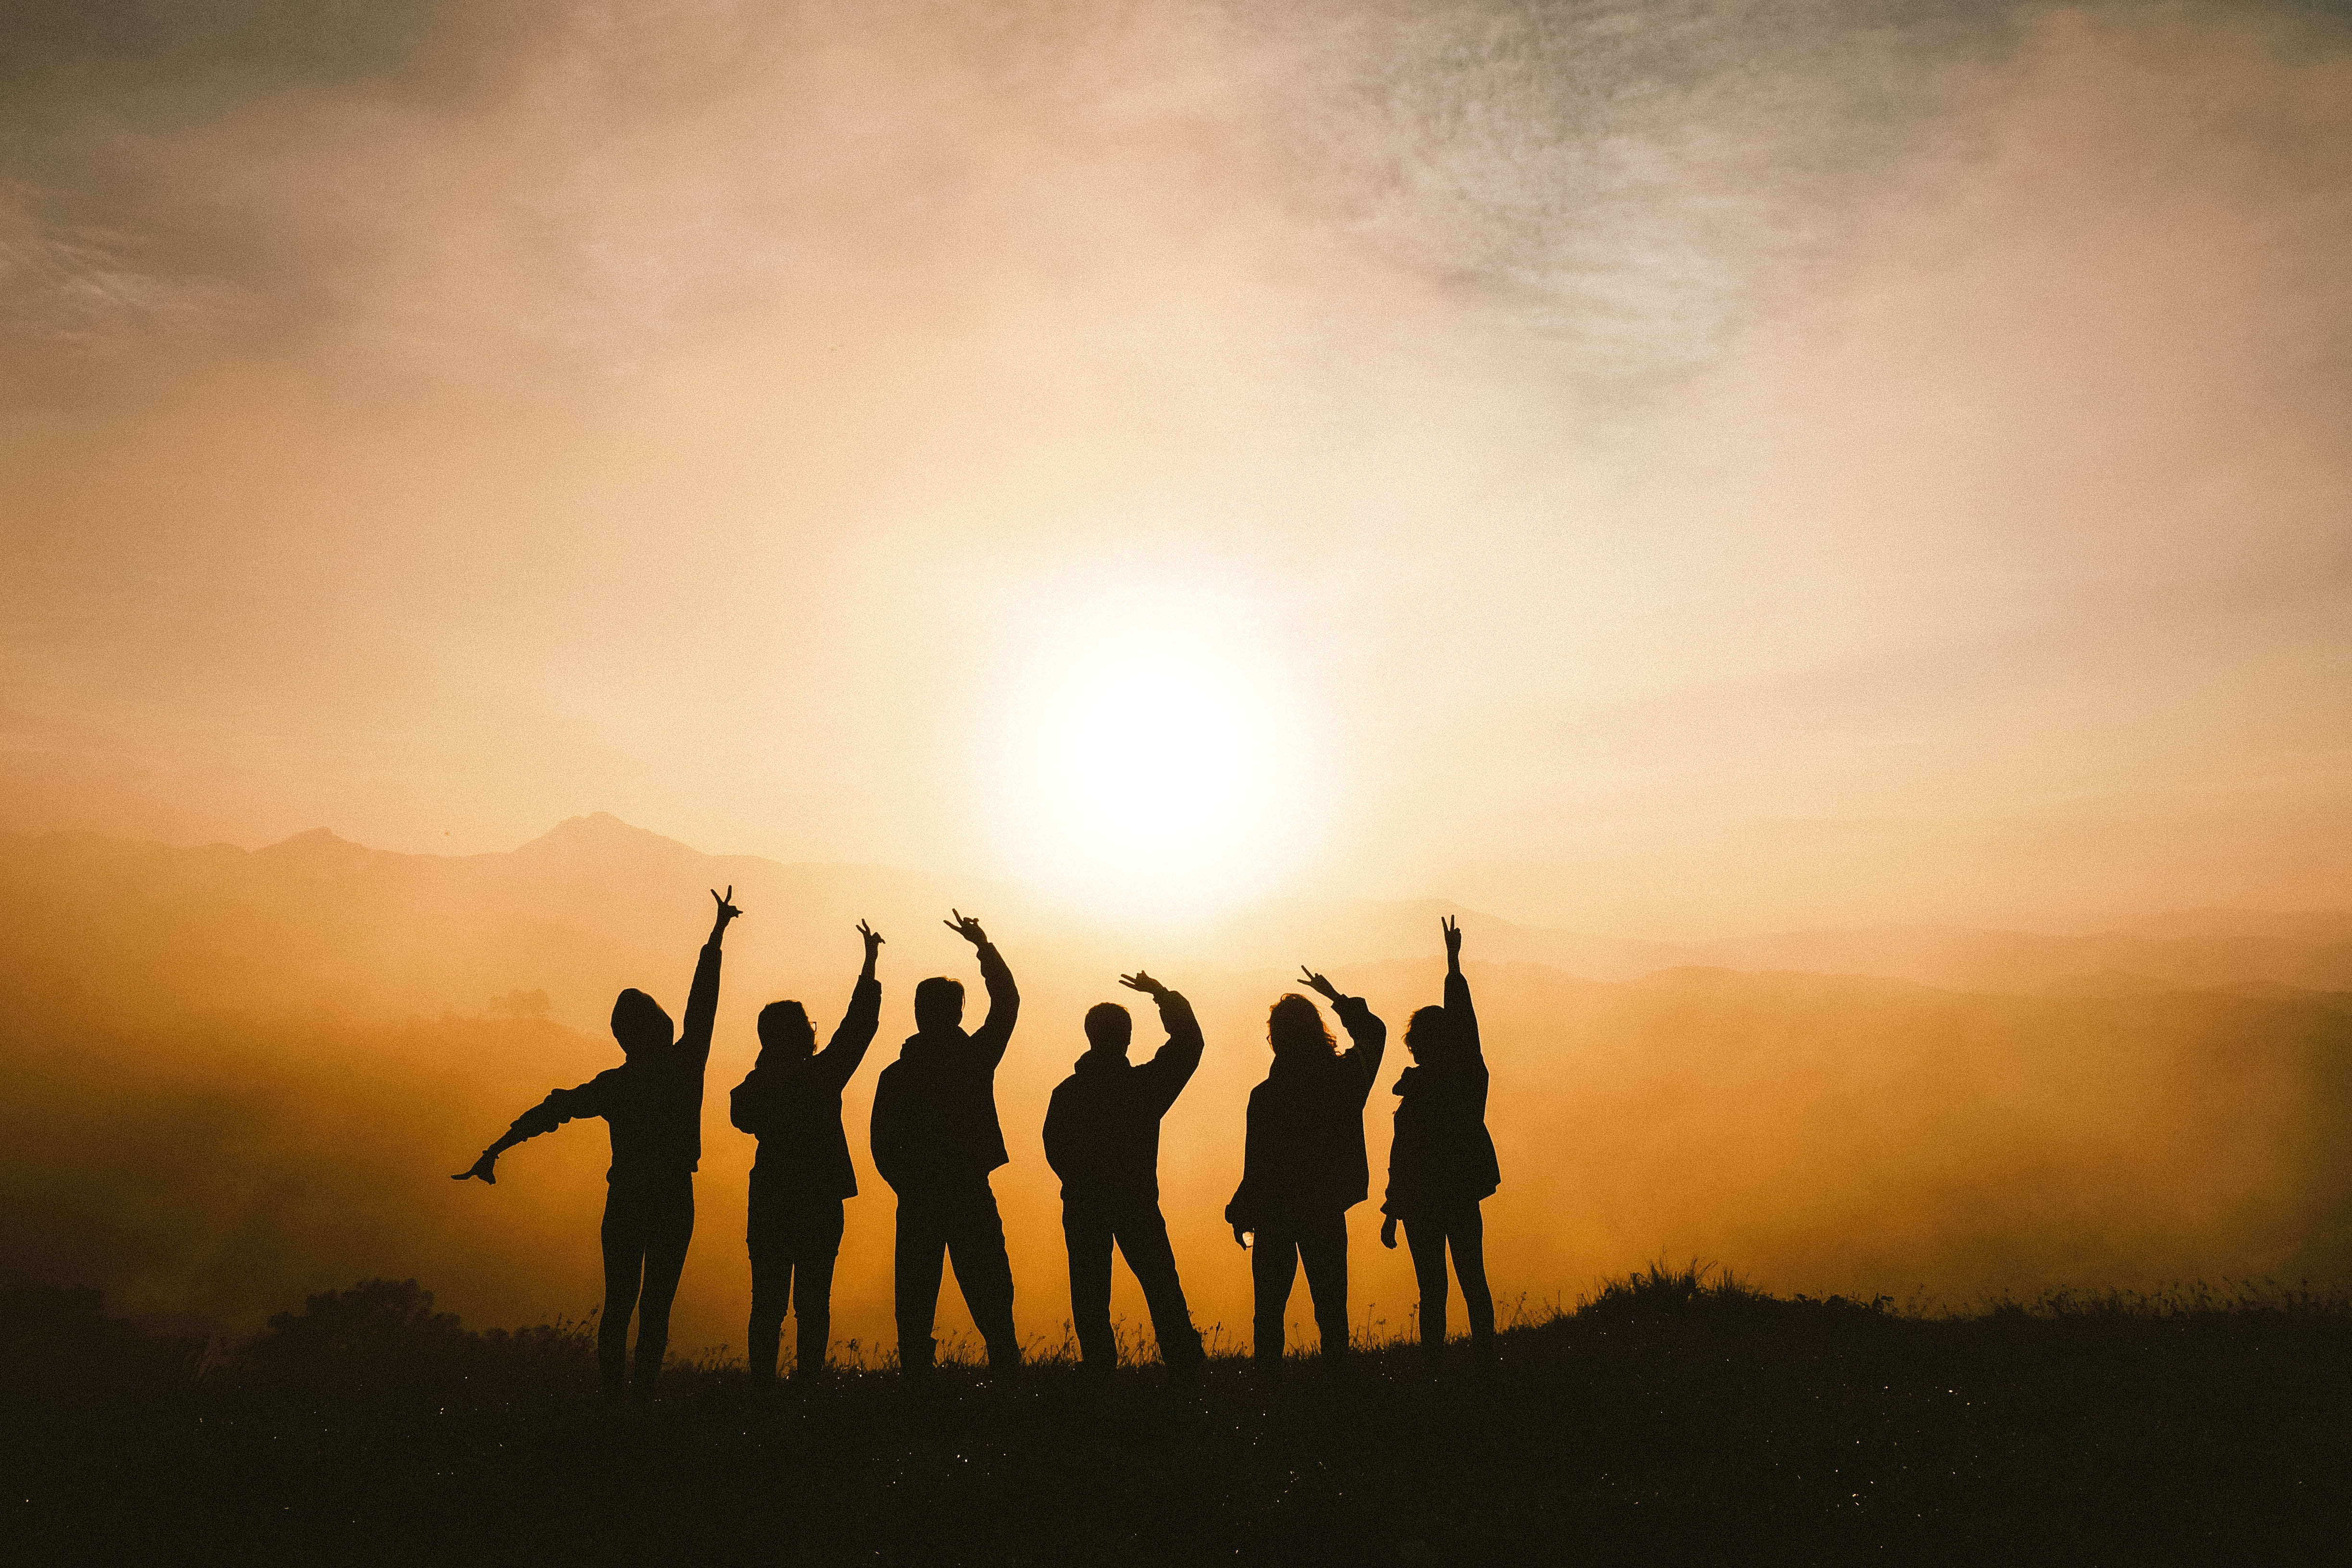 Silhouettes of several people against the sunset backdrop stretch their arms up in joy.